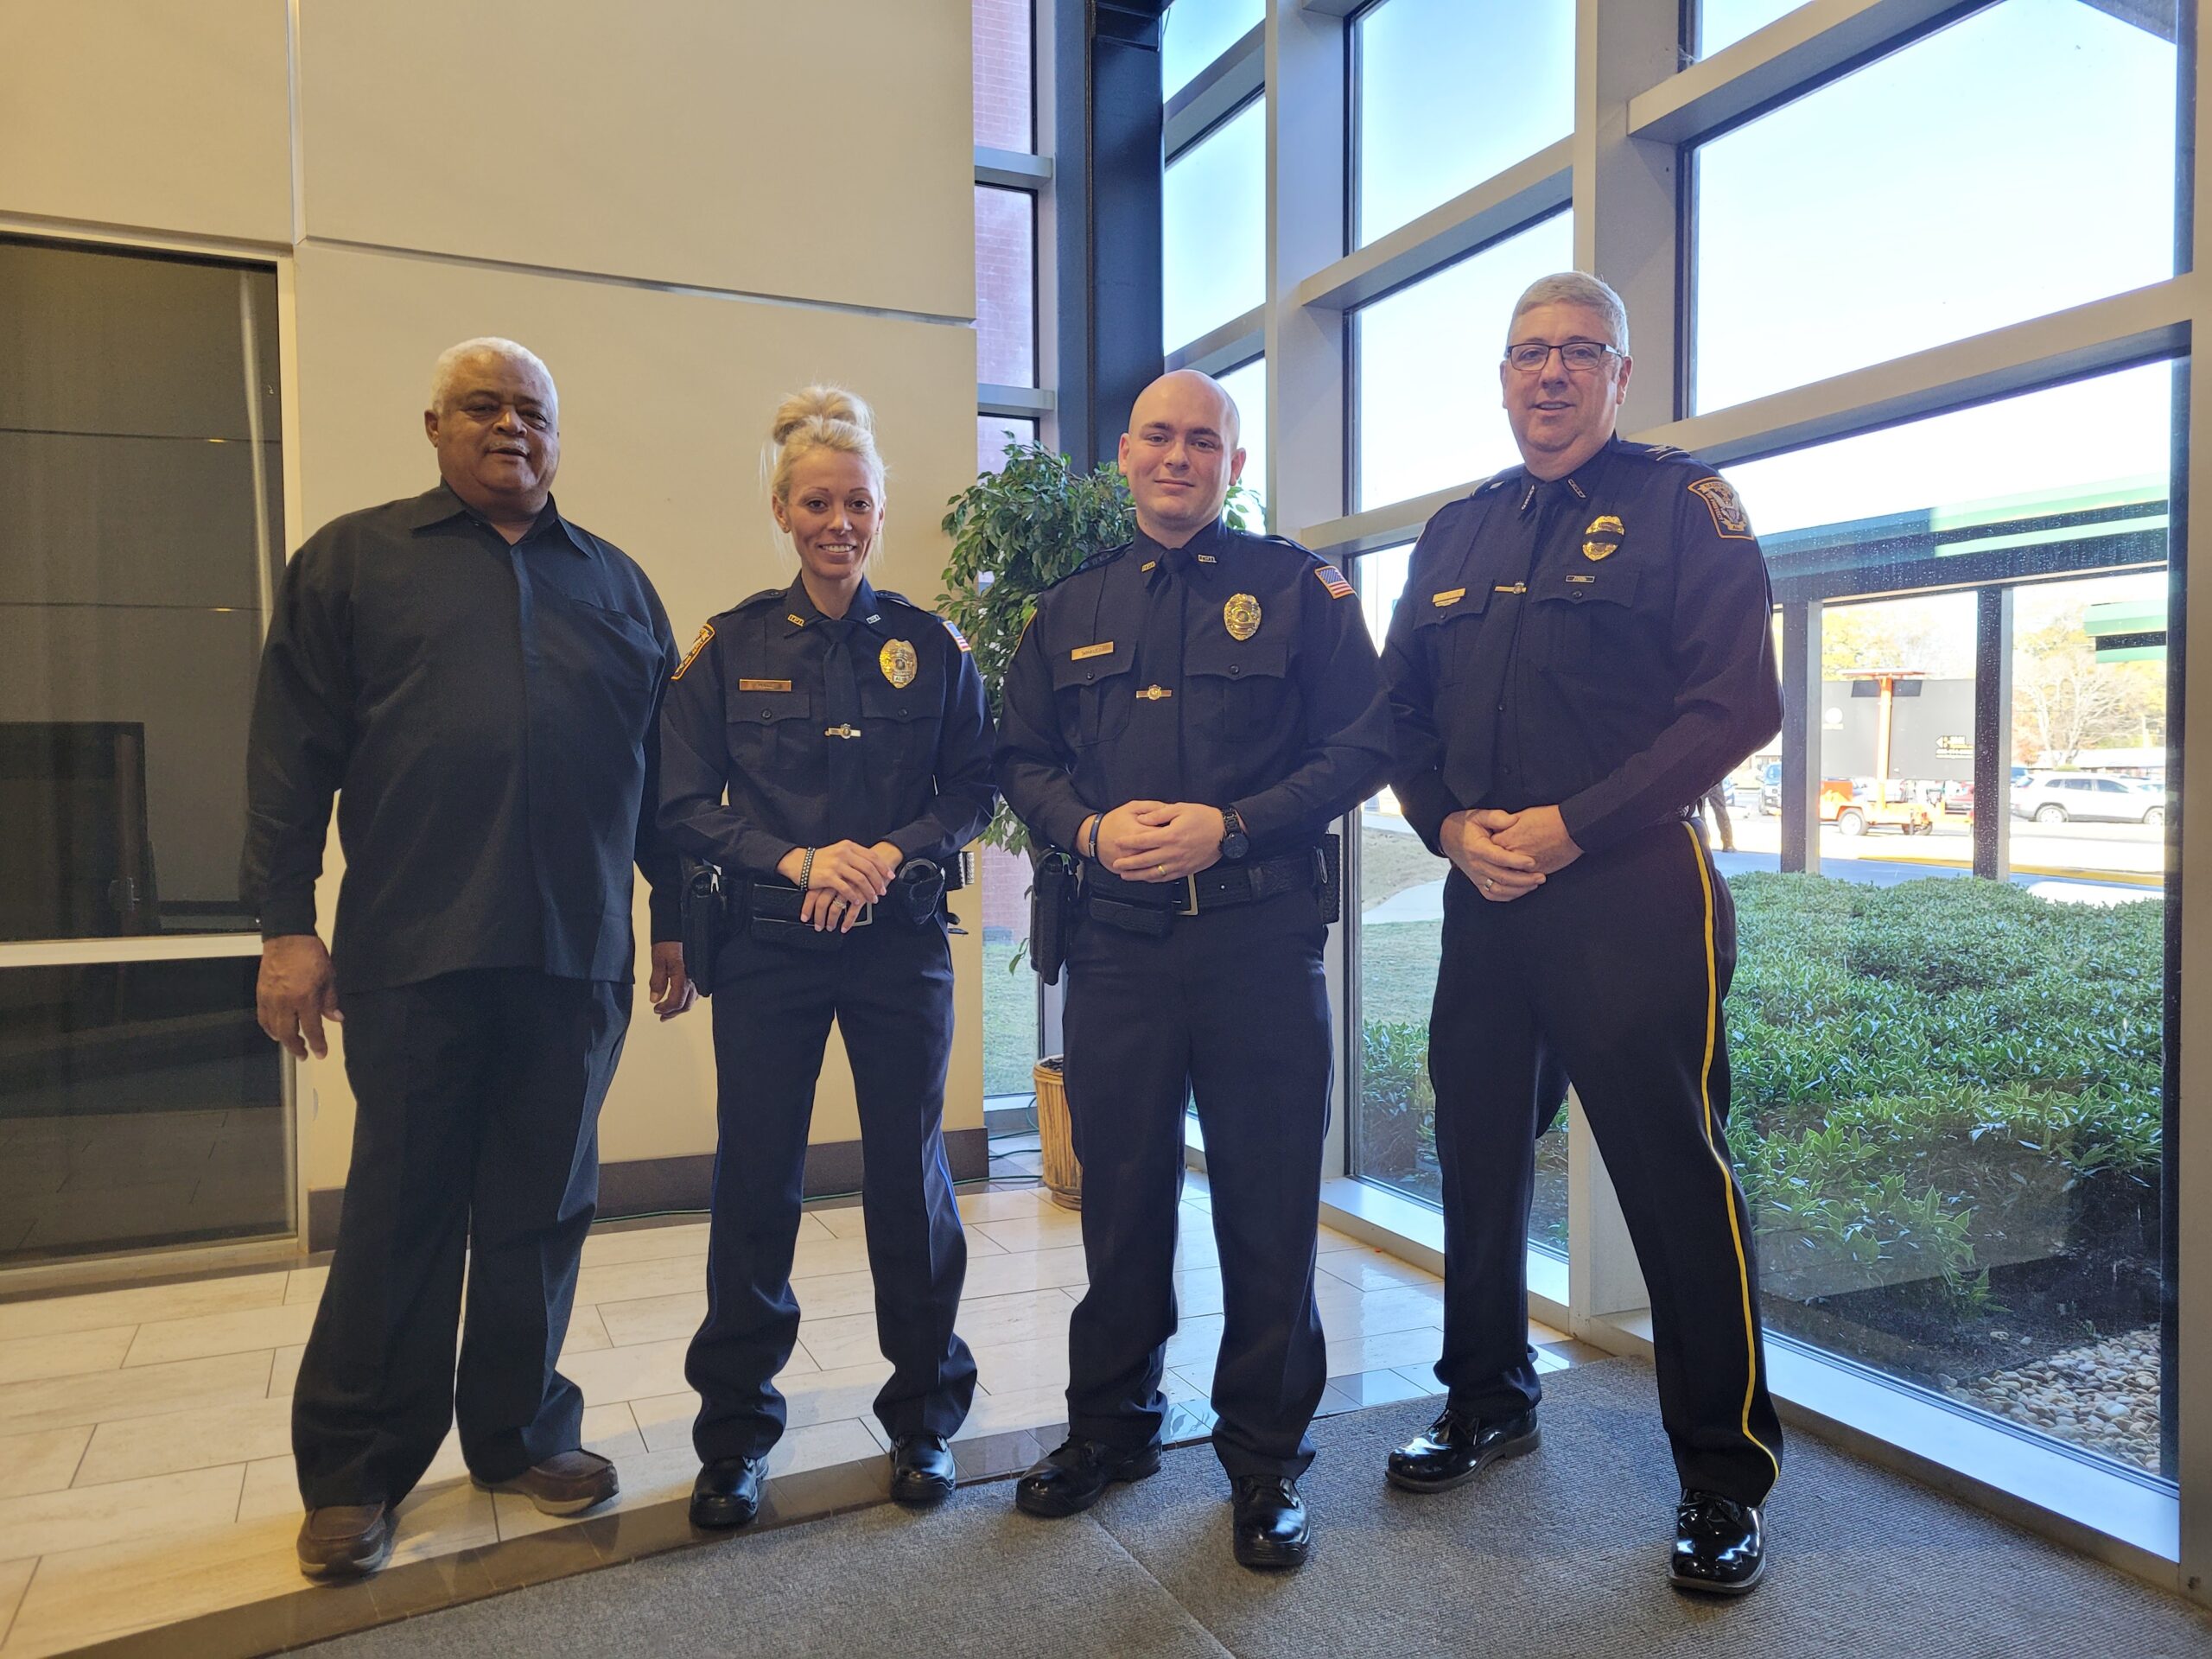 LEFT TO RIGHT
MAYOR FRANK GOODMAN, OFFICER JESSICA MACE, OFFICER JORY WHALEY, CHIEF JONATHAN FLOYD